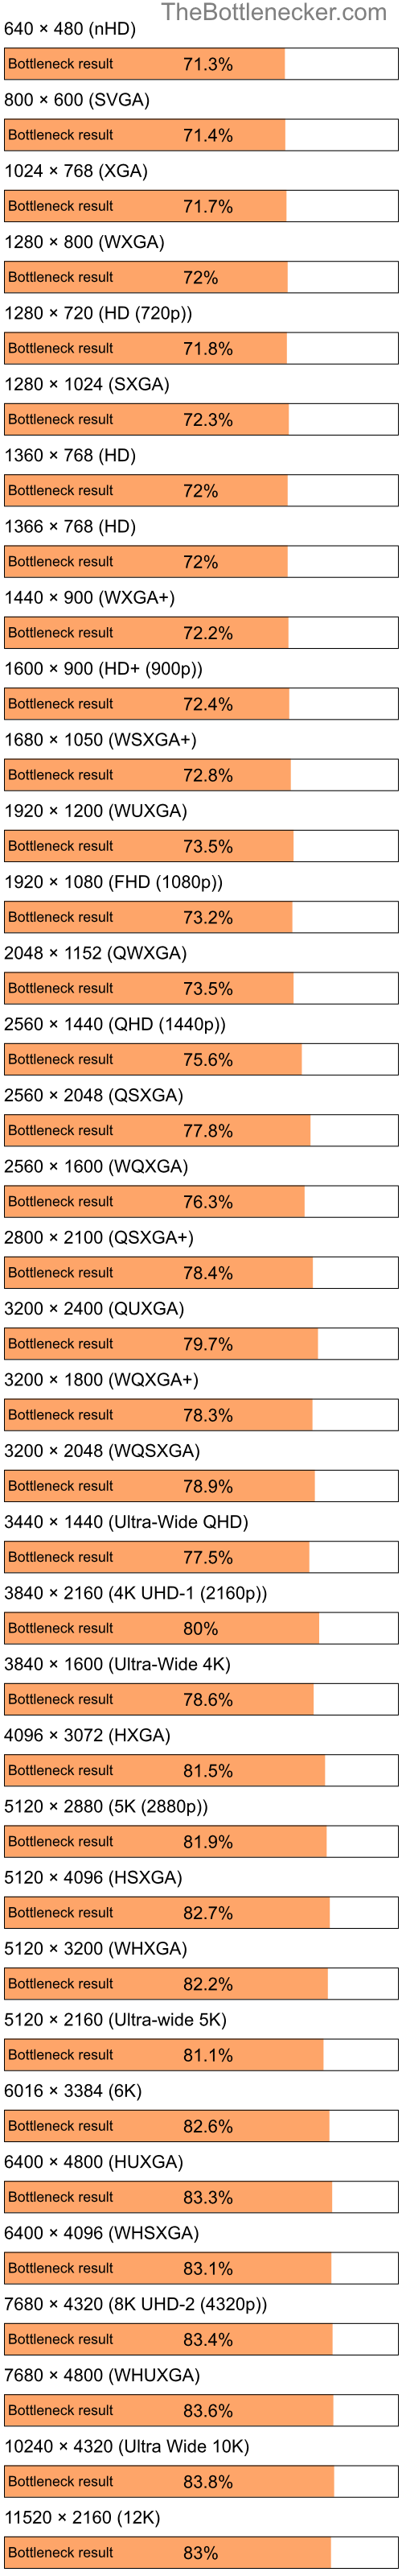 Bottleneck results by resolution for Intel Pentium 4 and NVIDIA GeForce 7500 LE in Graphic Card Intense Tasks